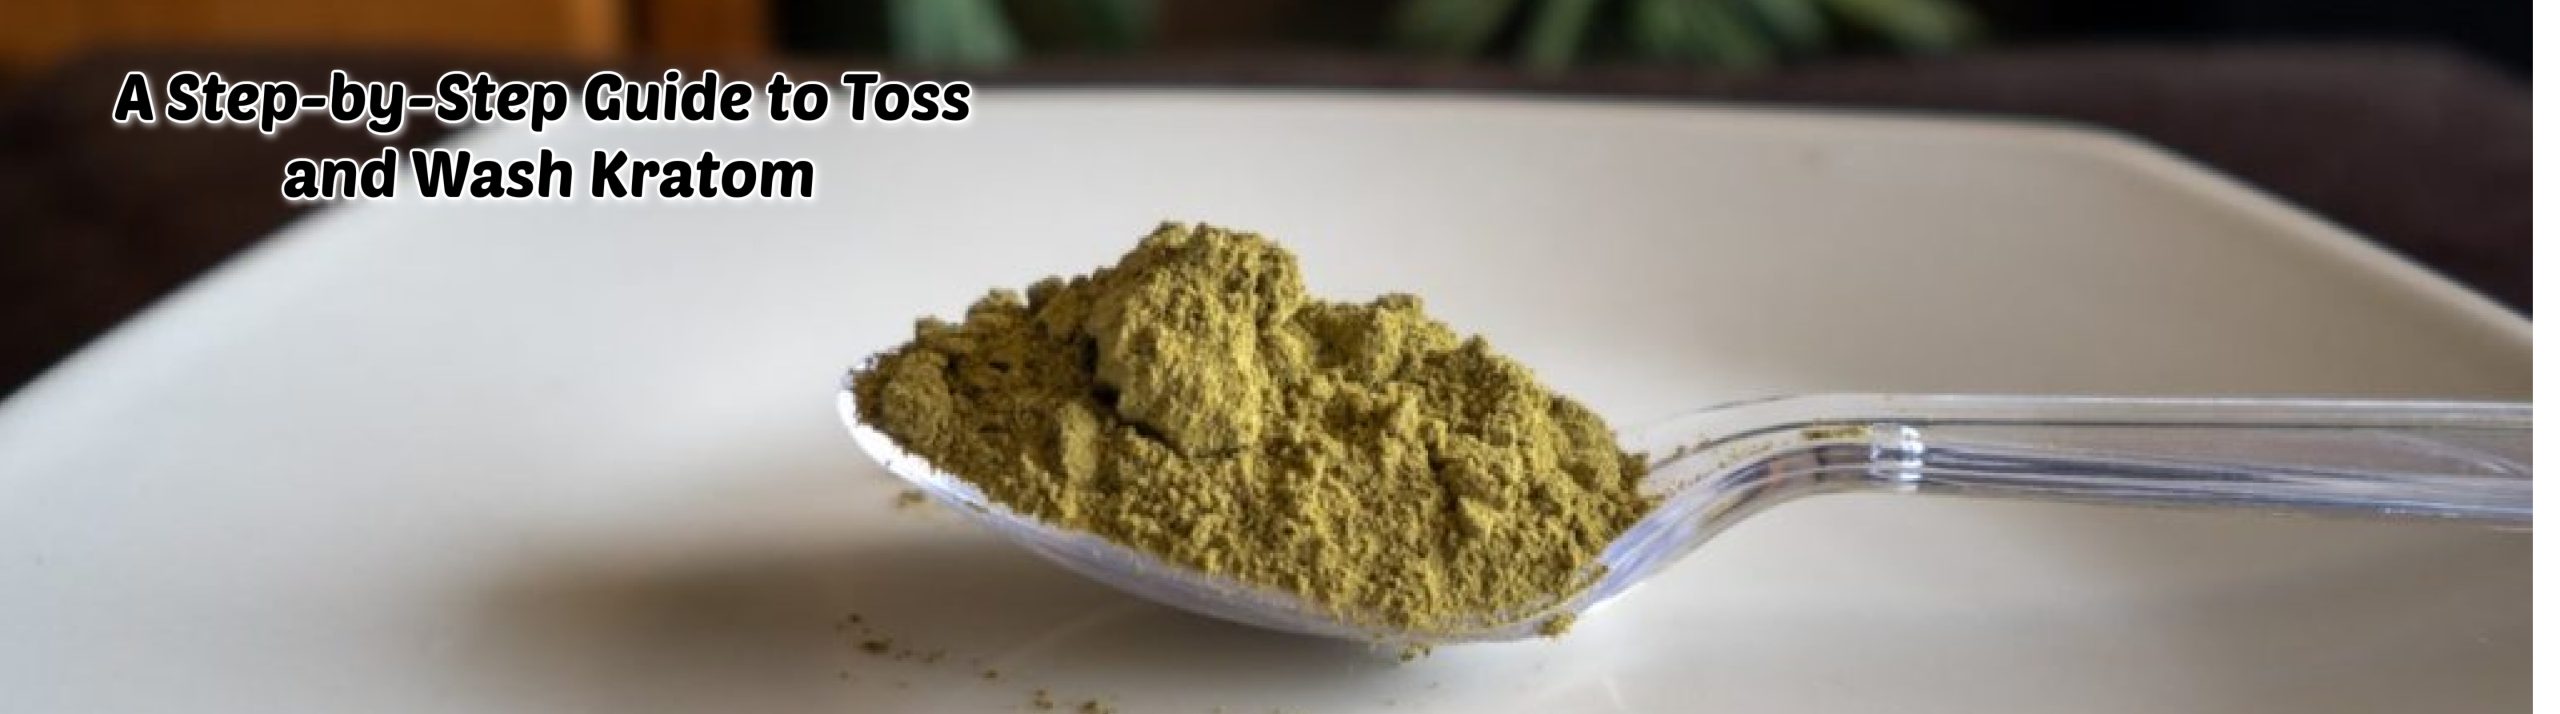 Toss and Wash Kratom: A Step-by-Step Guide on How to Do It